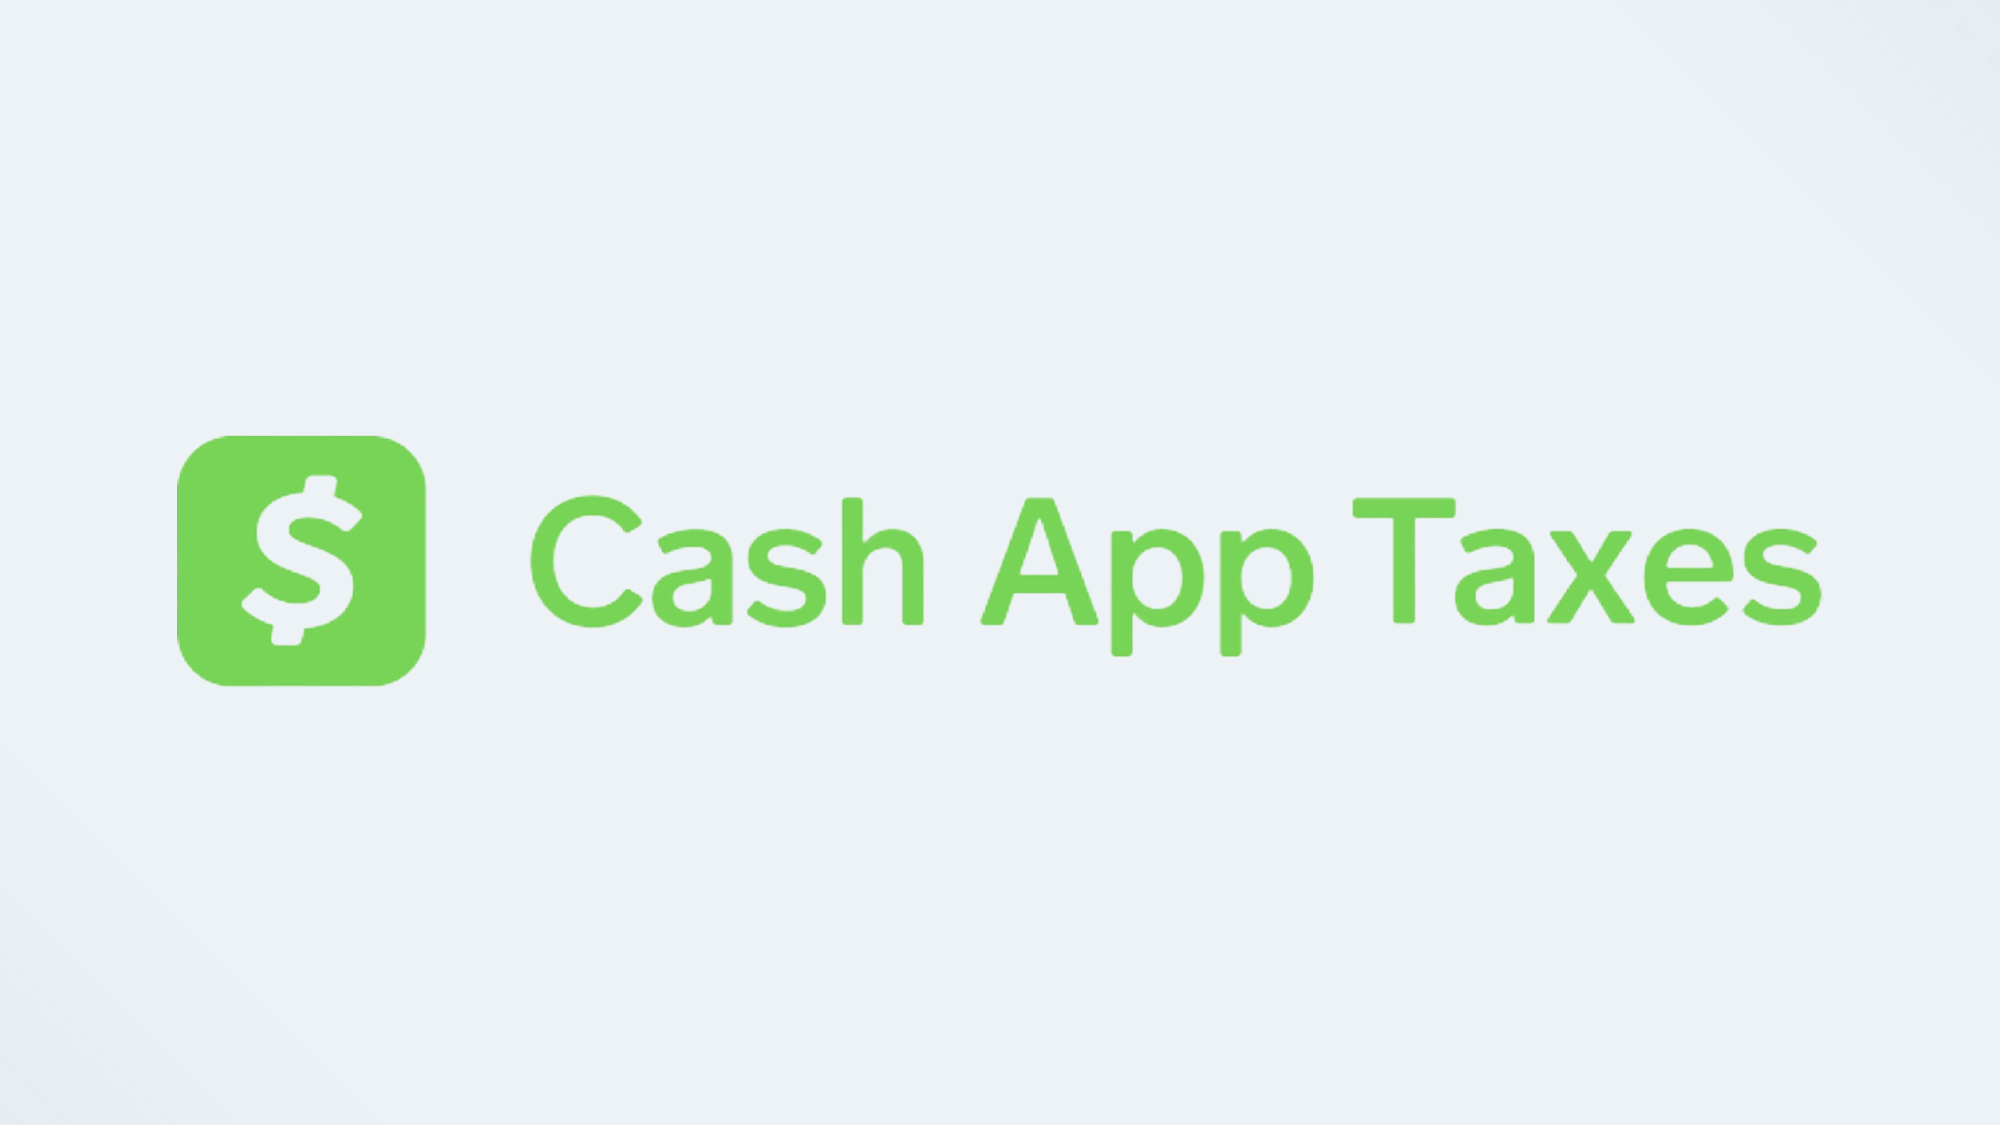 Cash App - The easiest way to send, spend, bank, and invest